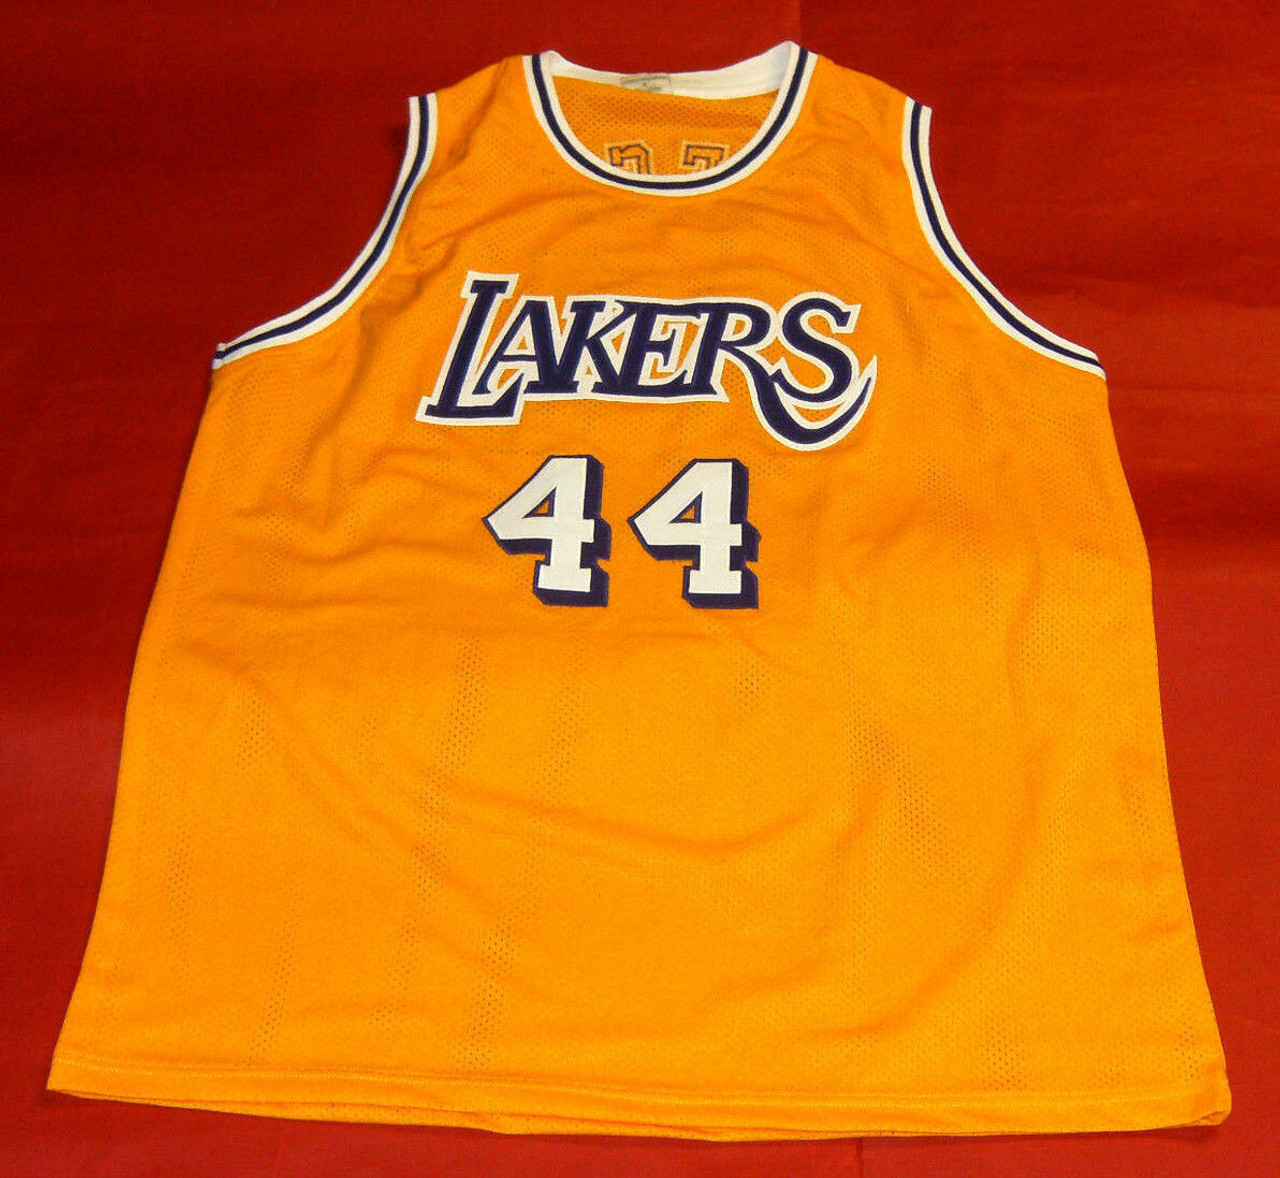 Los Angeles Lakers Jerry West Autographed Signed Jersey Jsa Coa